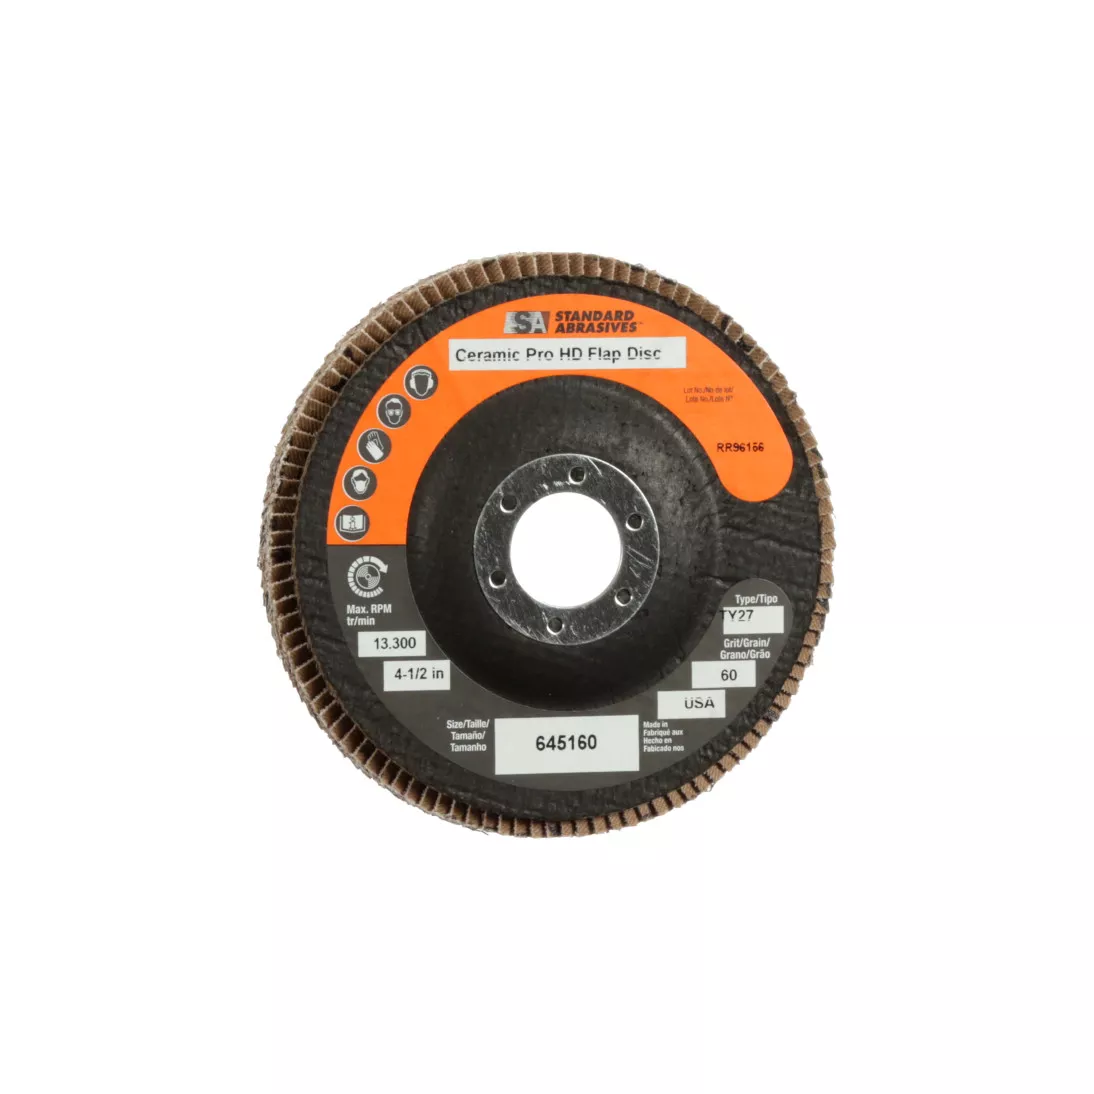 Standard Abrasives™ Ceramic Pro Type 27 High Density Flap Disc, 645160,
4 1/2 in x 7/8 60 Y-weight, 10 ea/Case